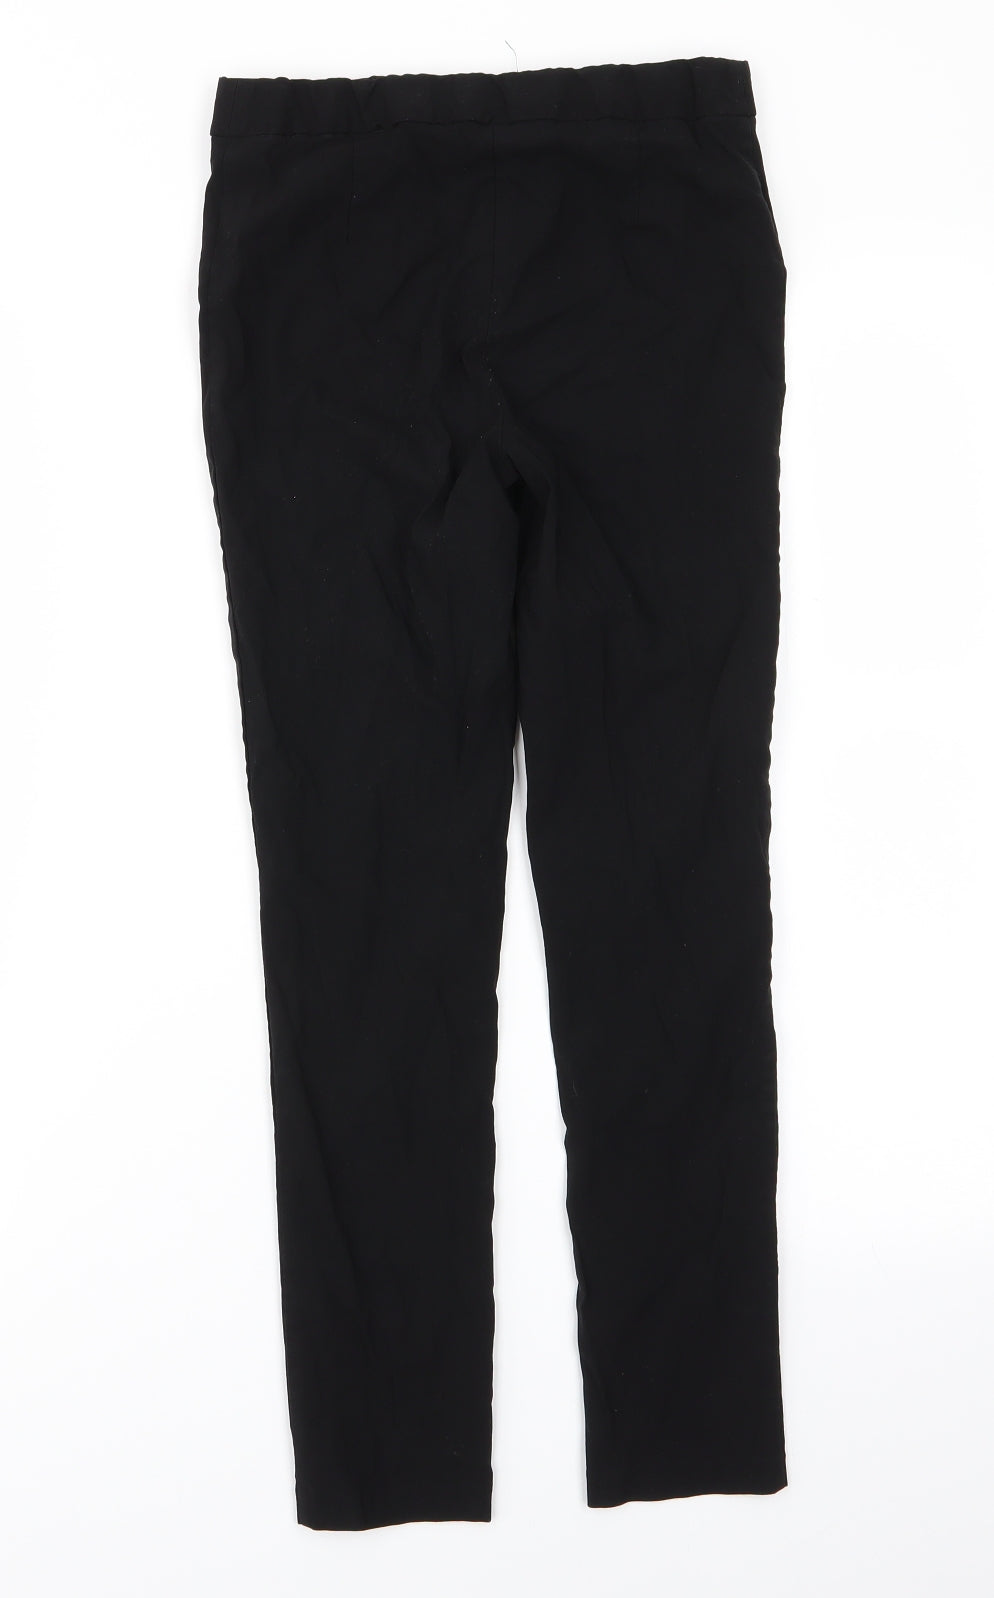 George Girls Black   Dress Pants Trousers Size 10-11 Years